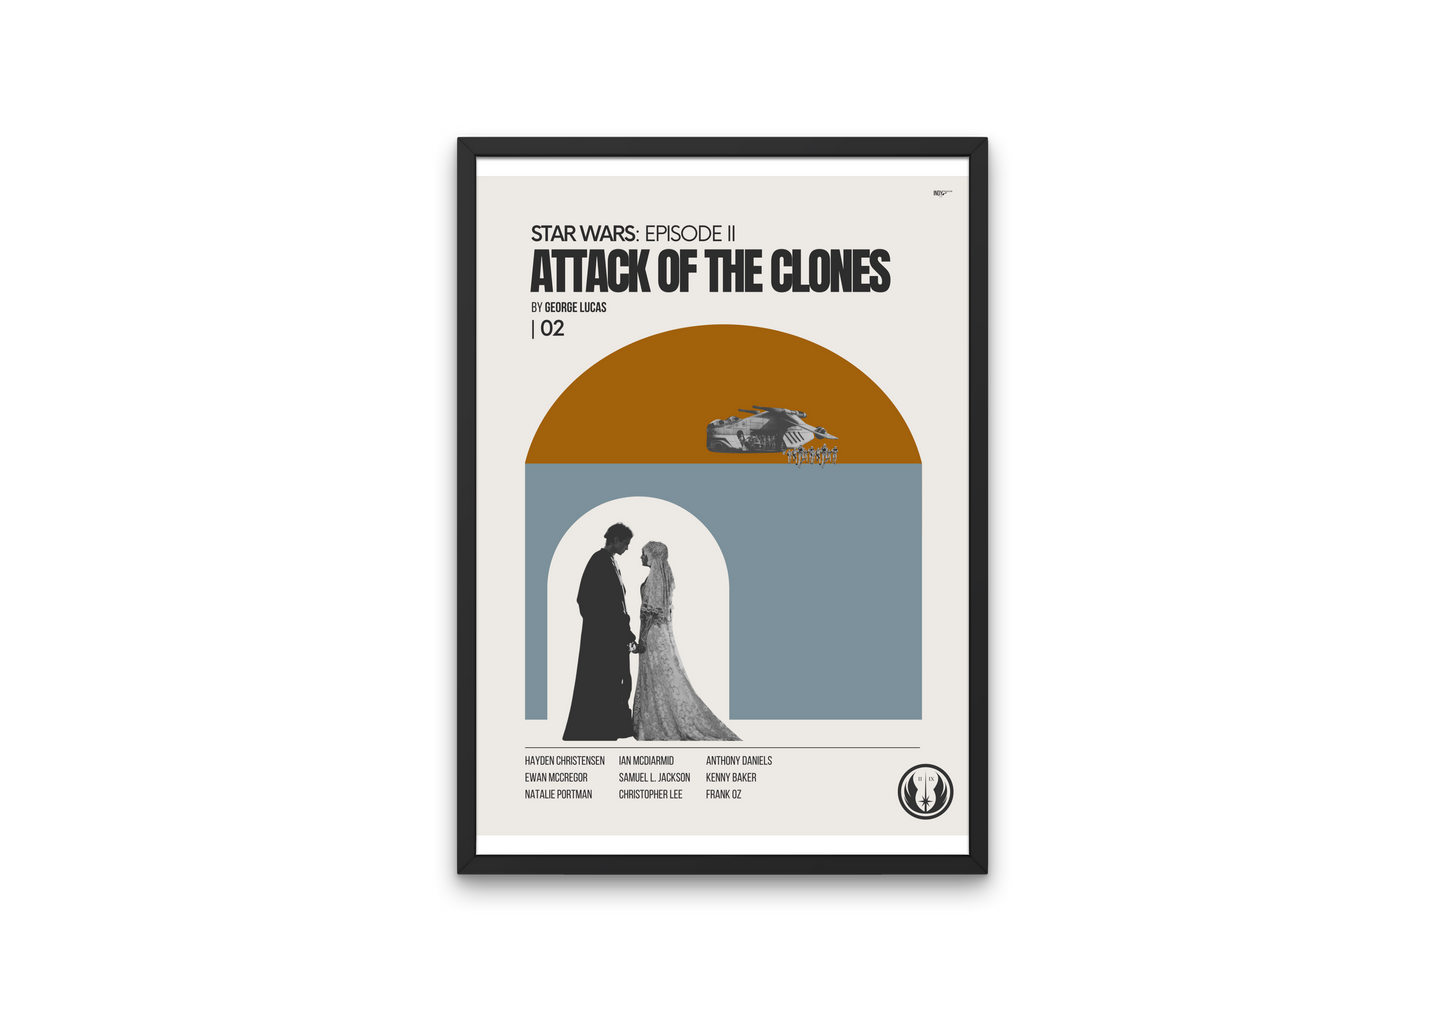 "Star Wars, Episode II: Attack of the Clones" Mid-Century Modern Film Poster